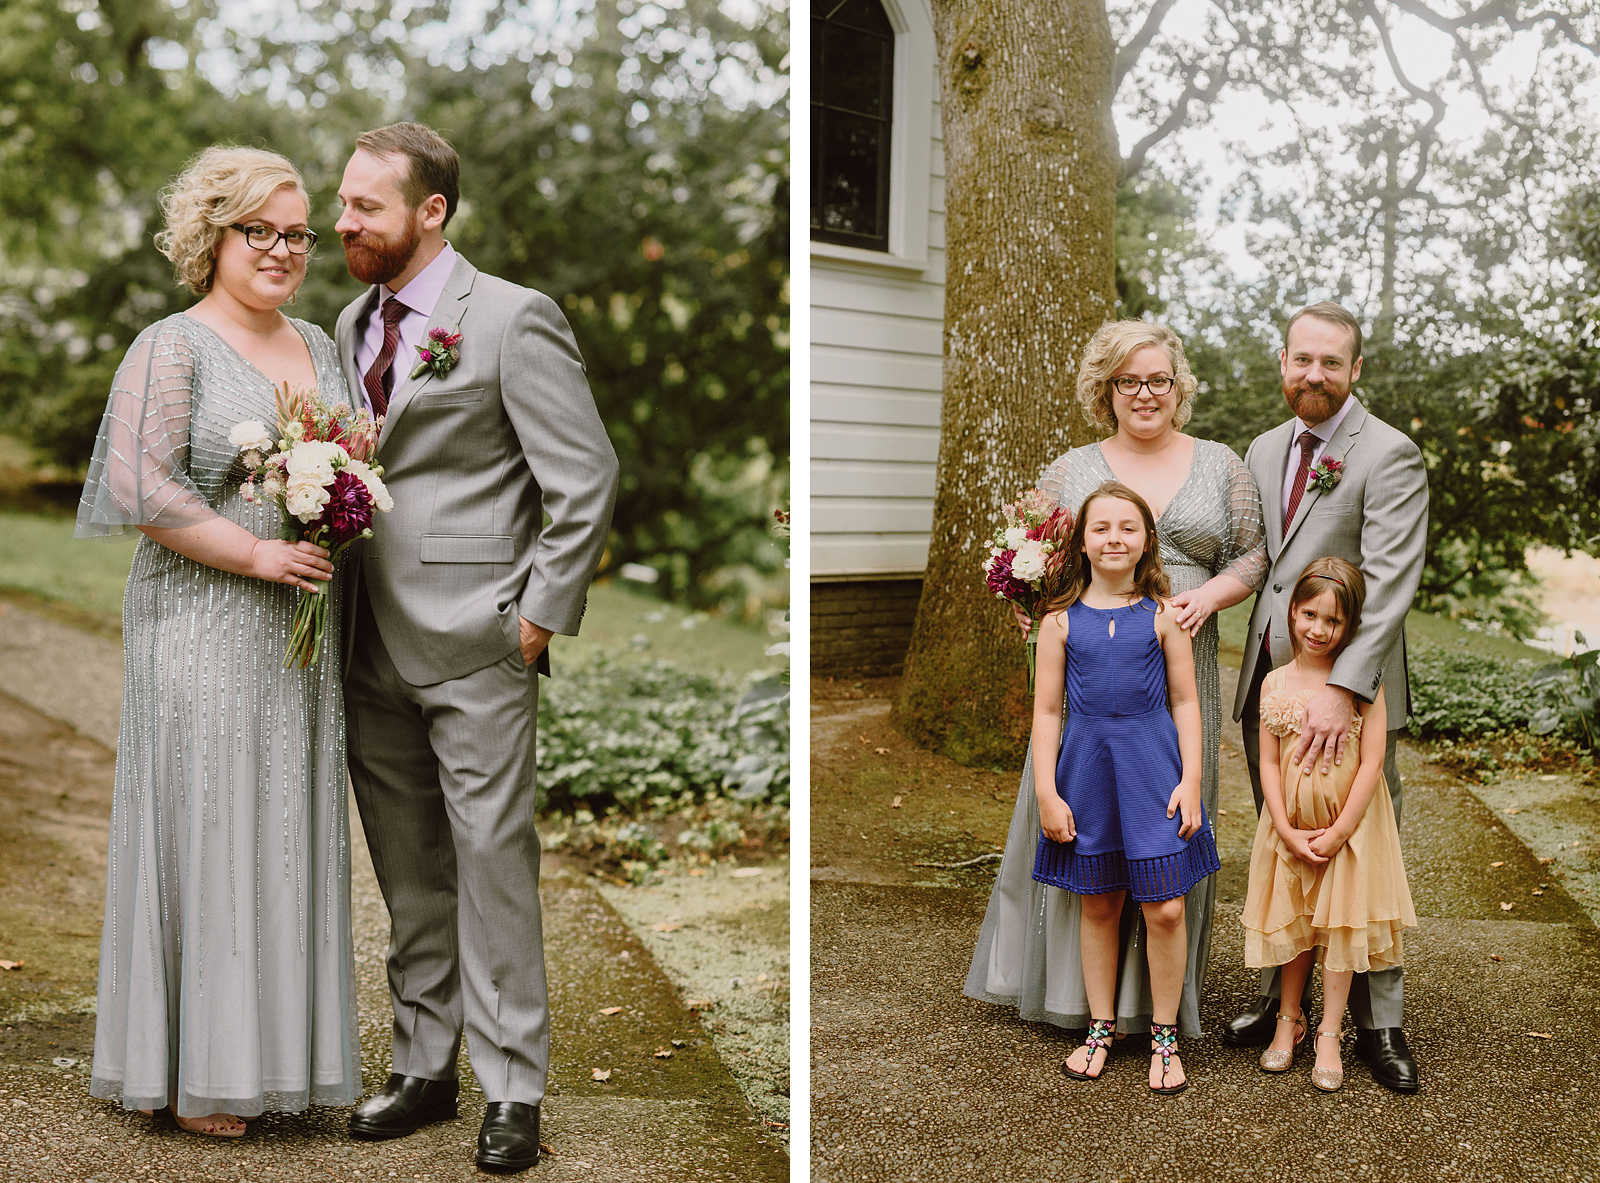 Portraits of newlyweds with the groom's daughter - Oaks Pioneer Church Wedding in Sellwood, OR